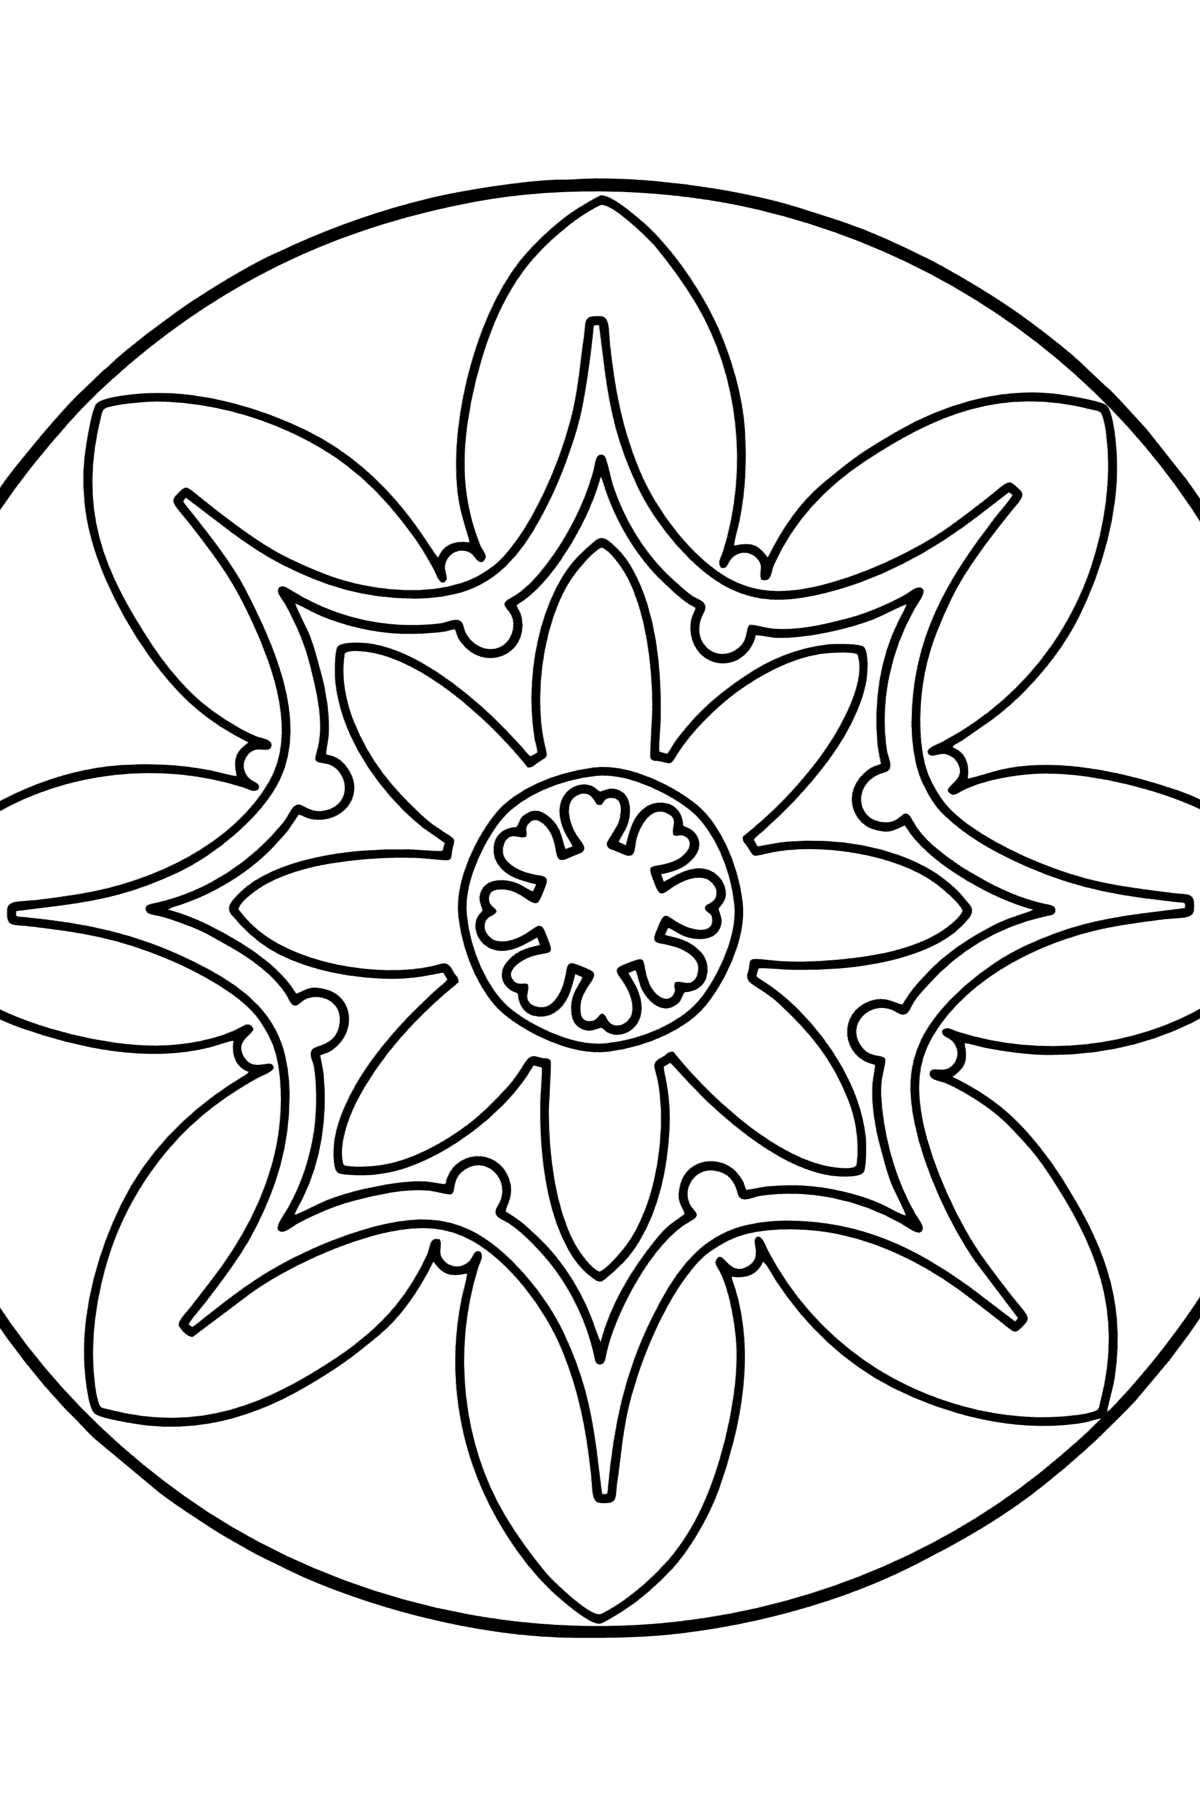 Mandala coloring page - 7 elements - Coloring Pages for Kids